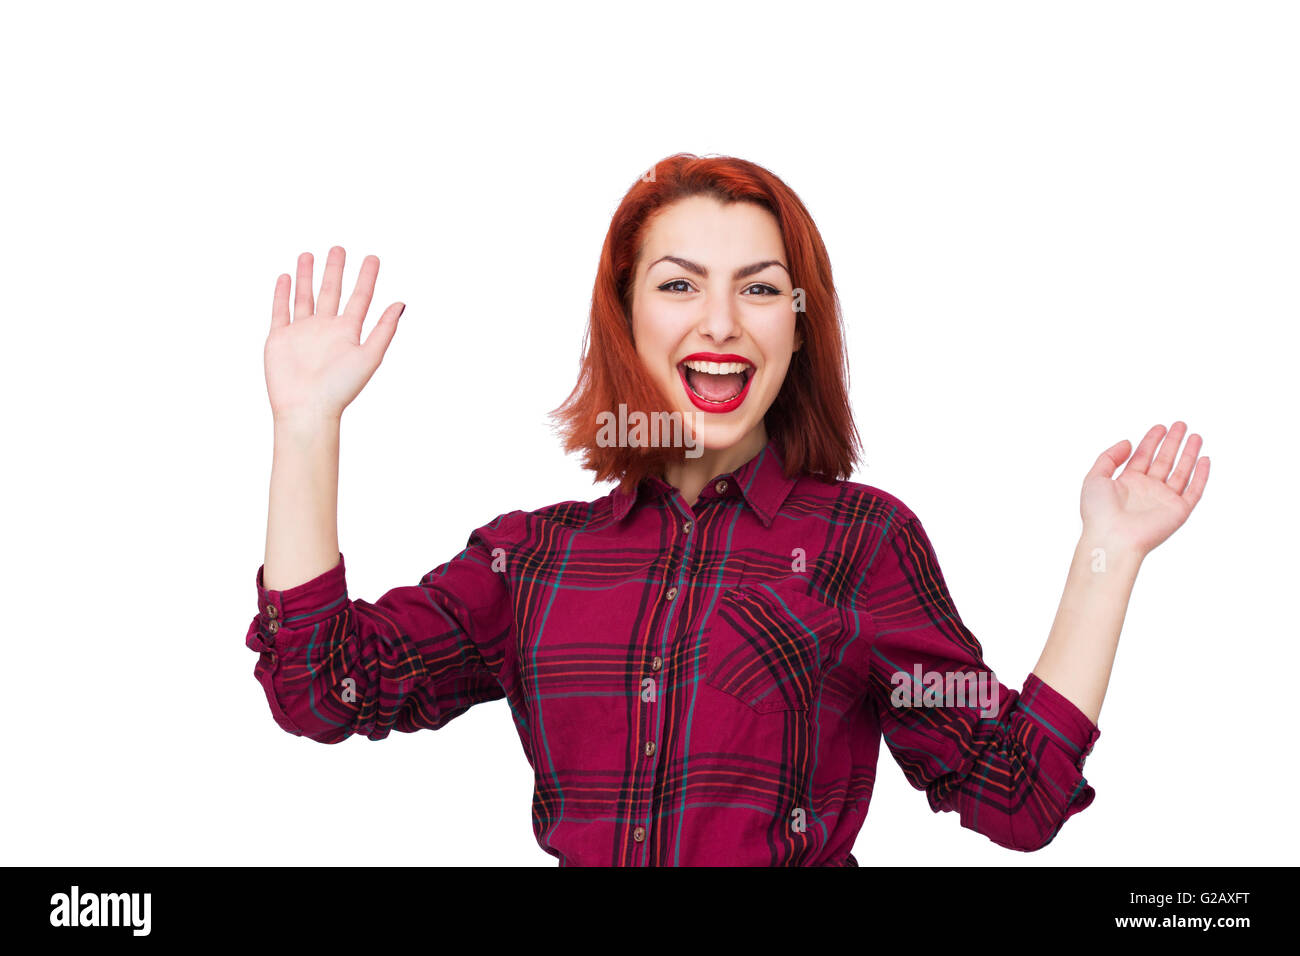 Portrait of a very happy young woman Stock Photo